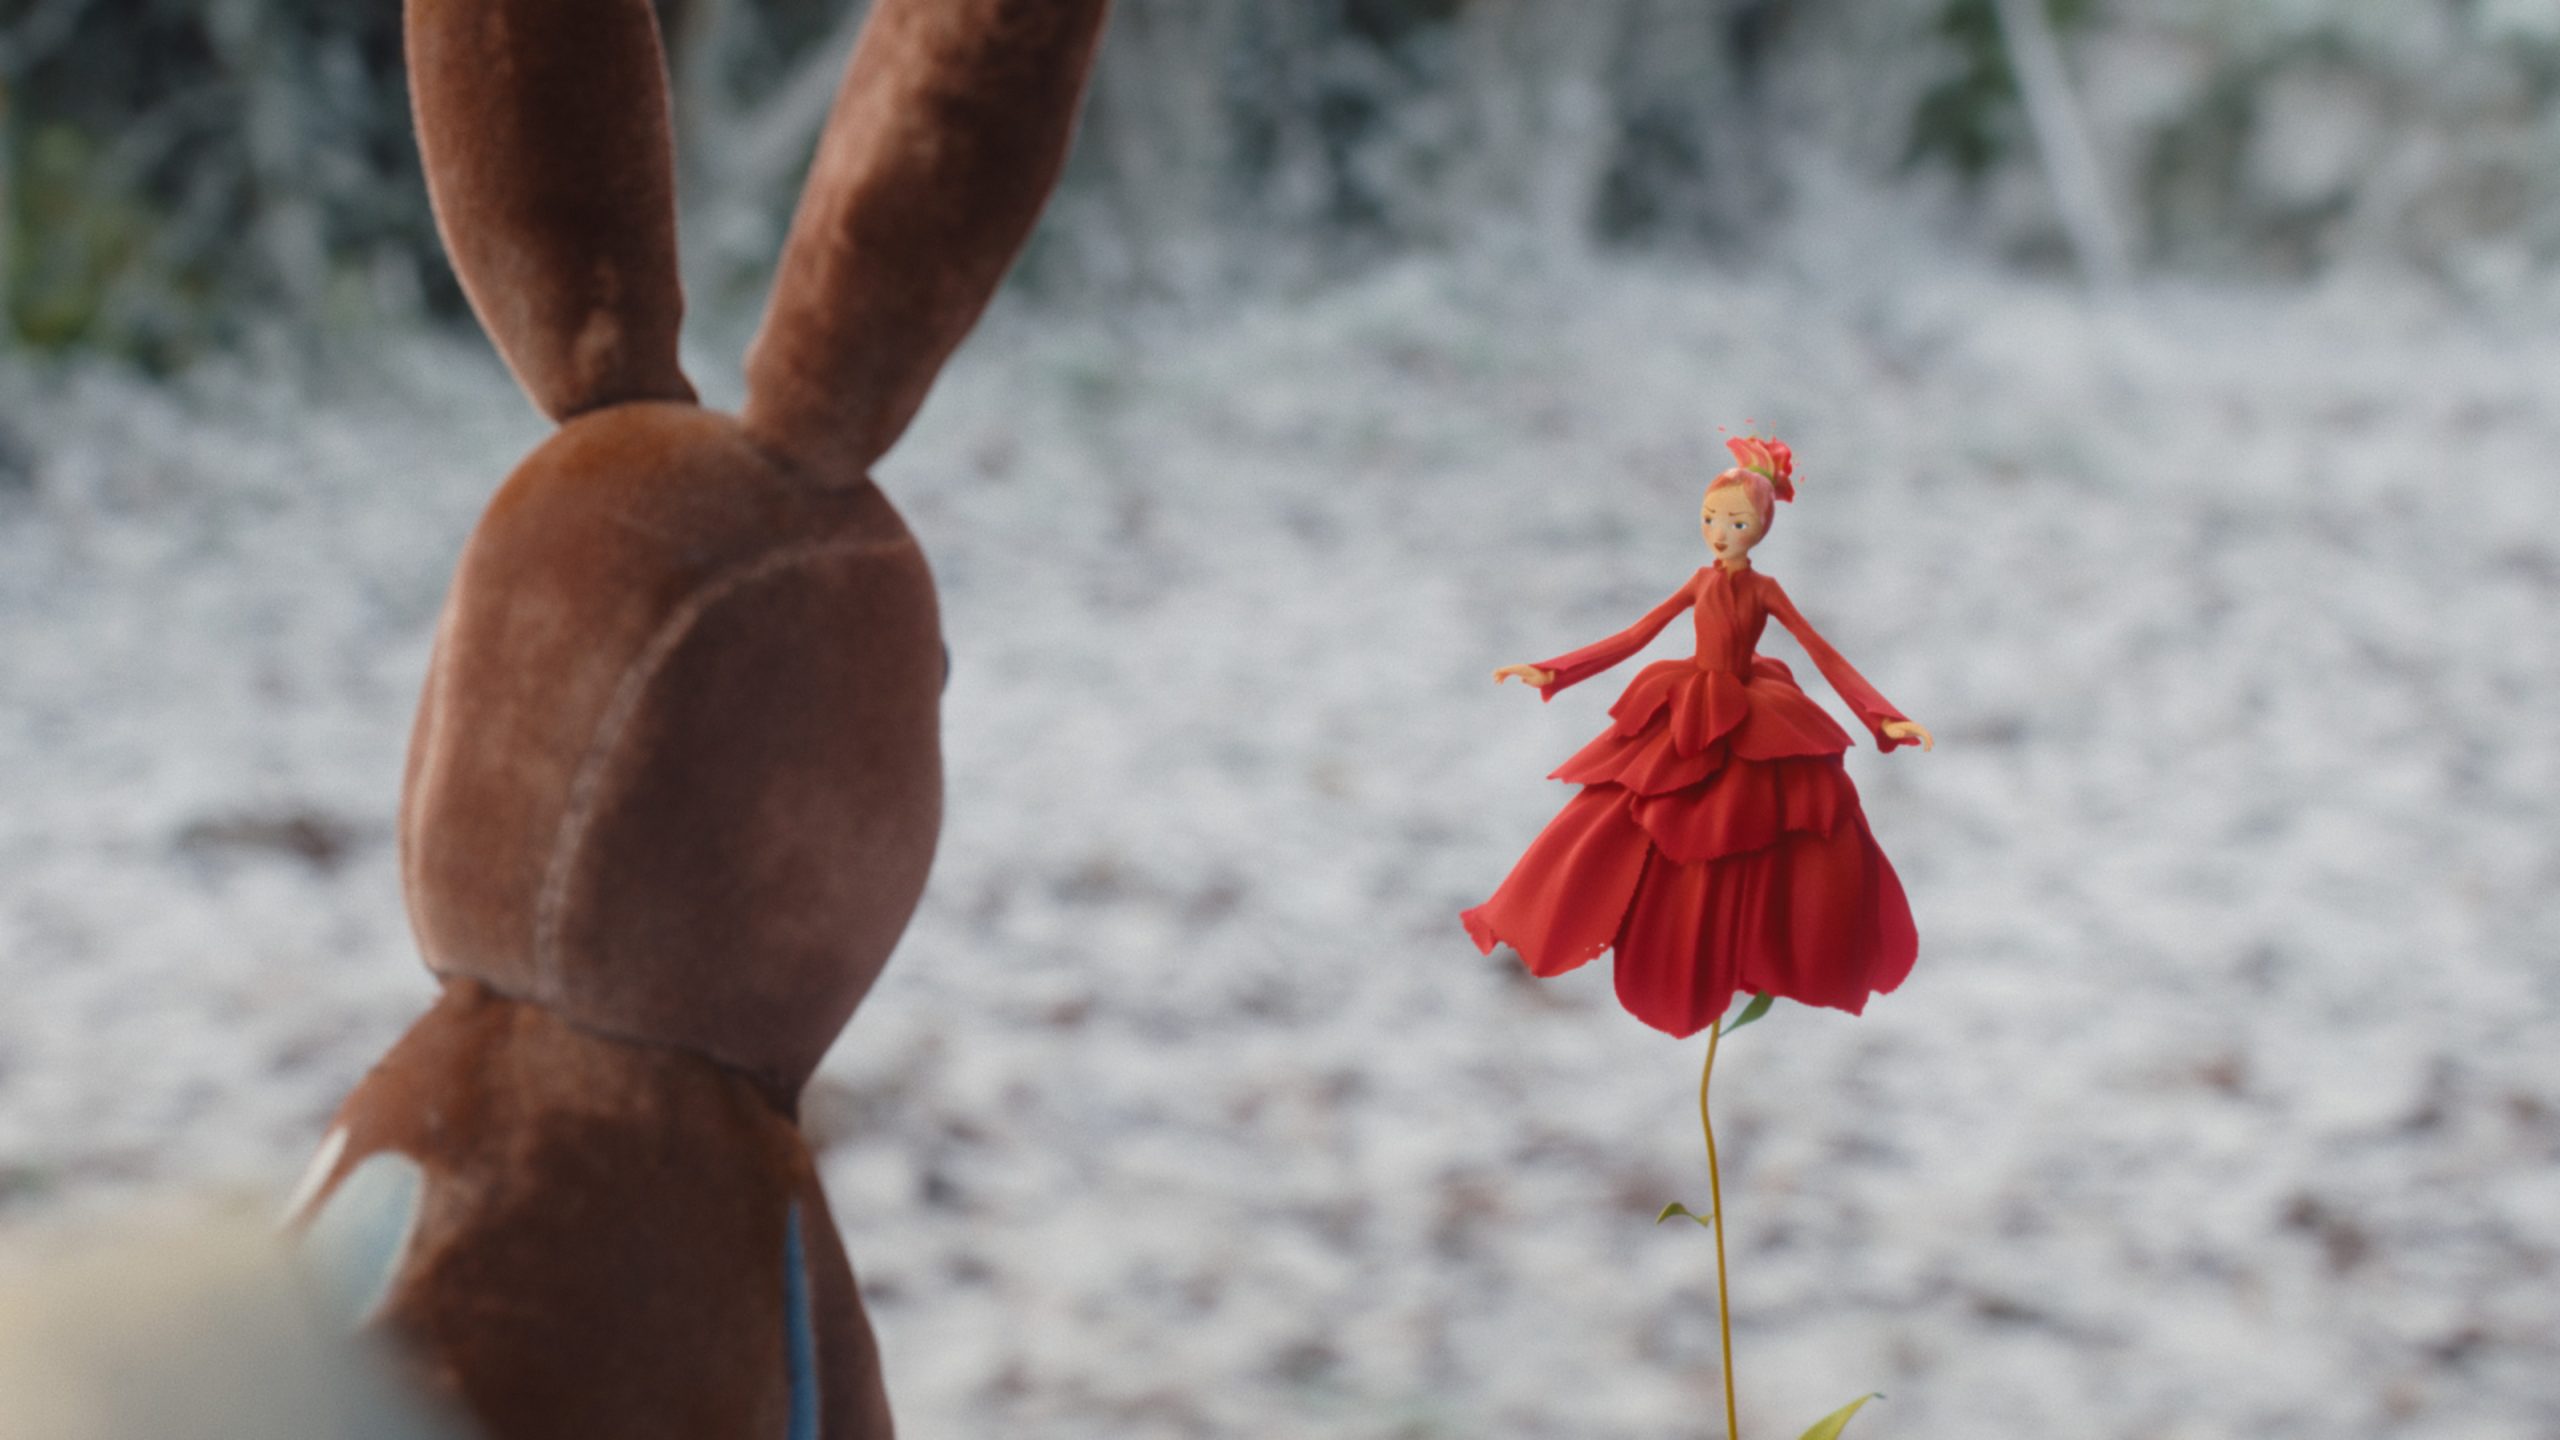 Velveteen Rabbit (voiced by Alex Lawther) and Playroom Fairy (voiced by Nicola Coughlan) in "The Velveteen Rabbit," premiering November 22, 2023 on Apple TV+.